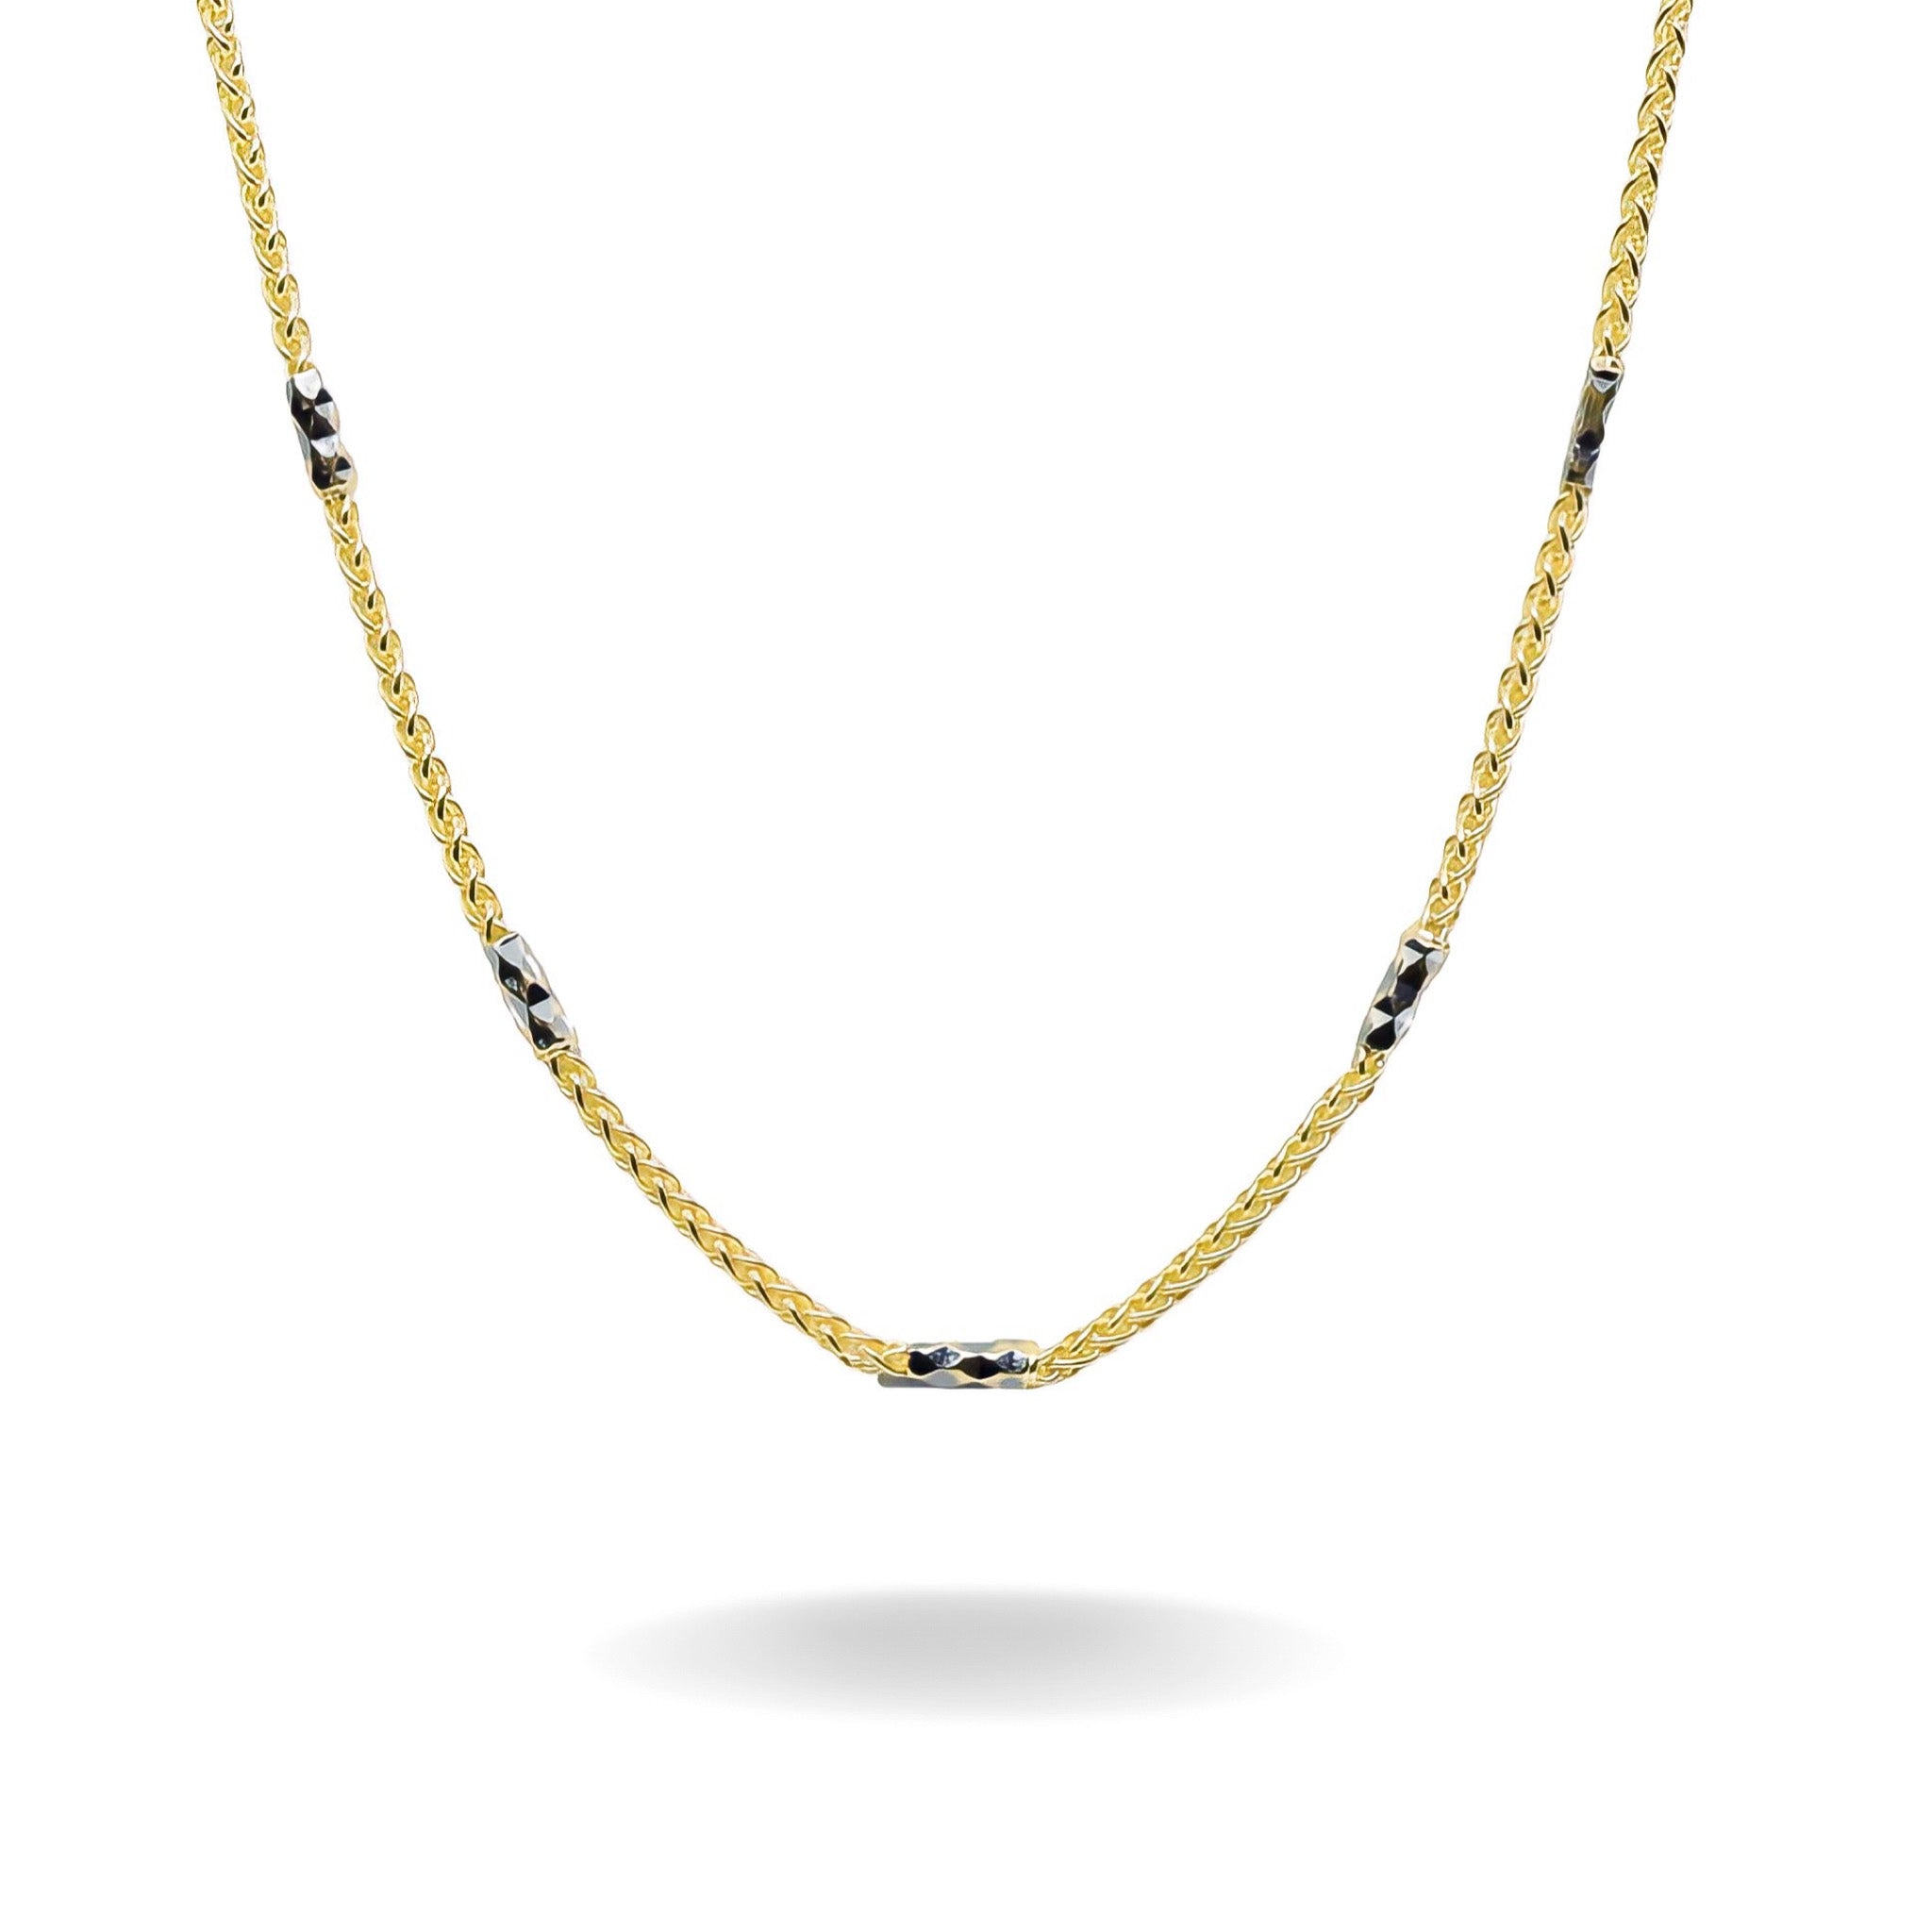 14K YELLOW GOLD TWO TONED BEADED WHEAT CHAIN